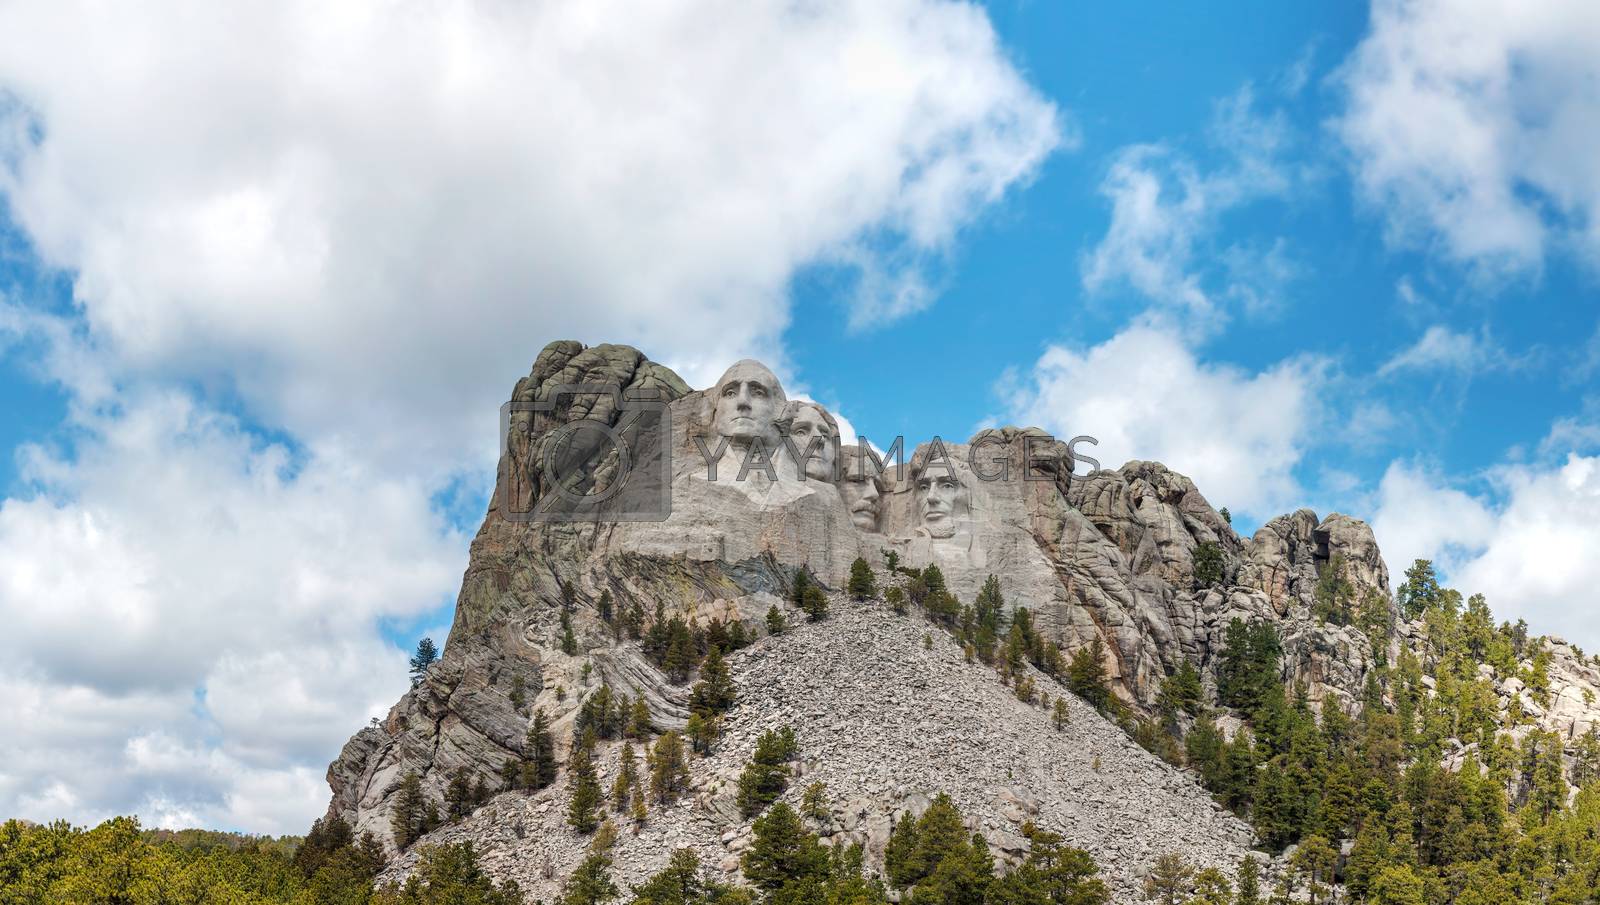 Royalty free image of Mount Rushmore monument in South Dakota by AndreyKr